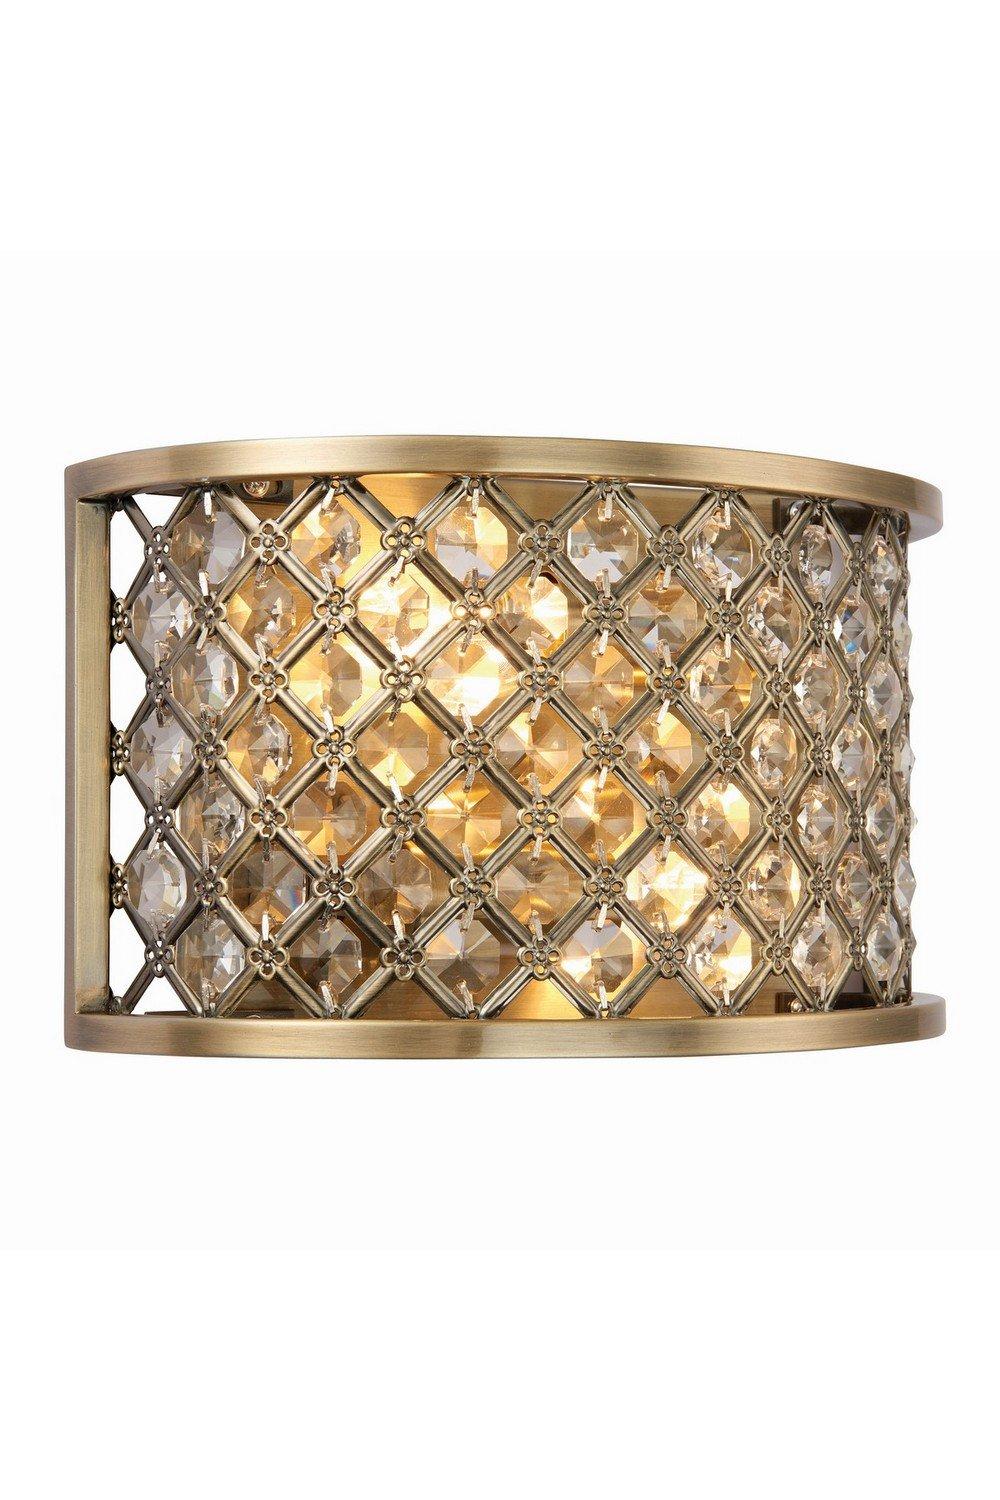 Hudson 2 Light Indoor Wall Light Antique Brass with Crystal E14